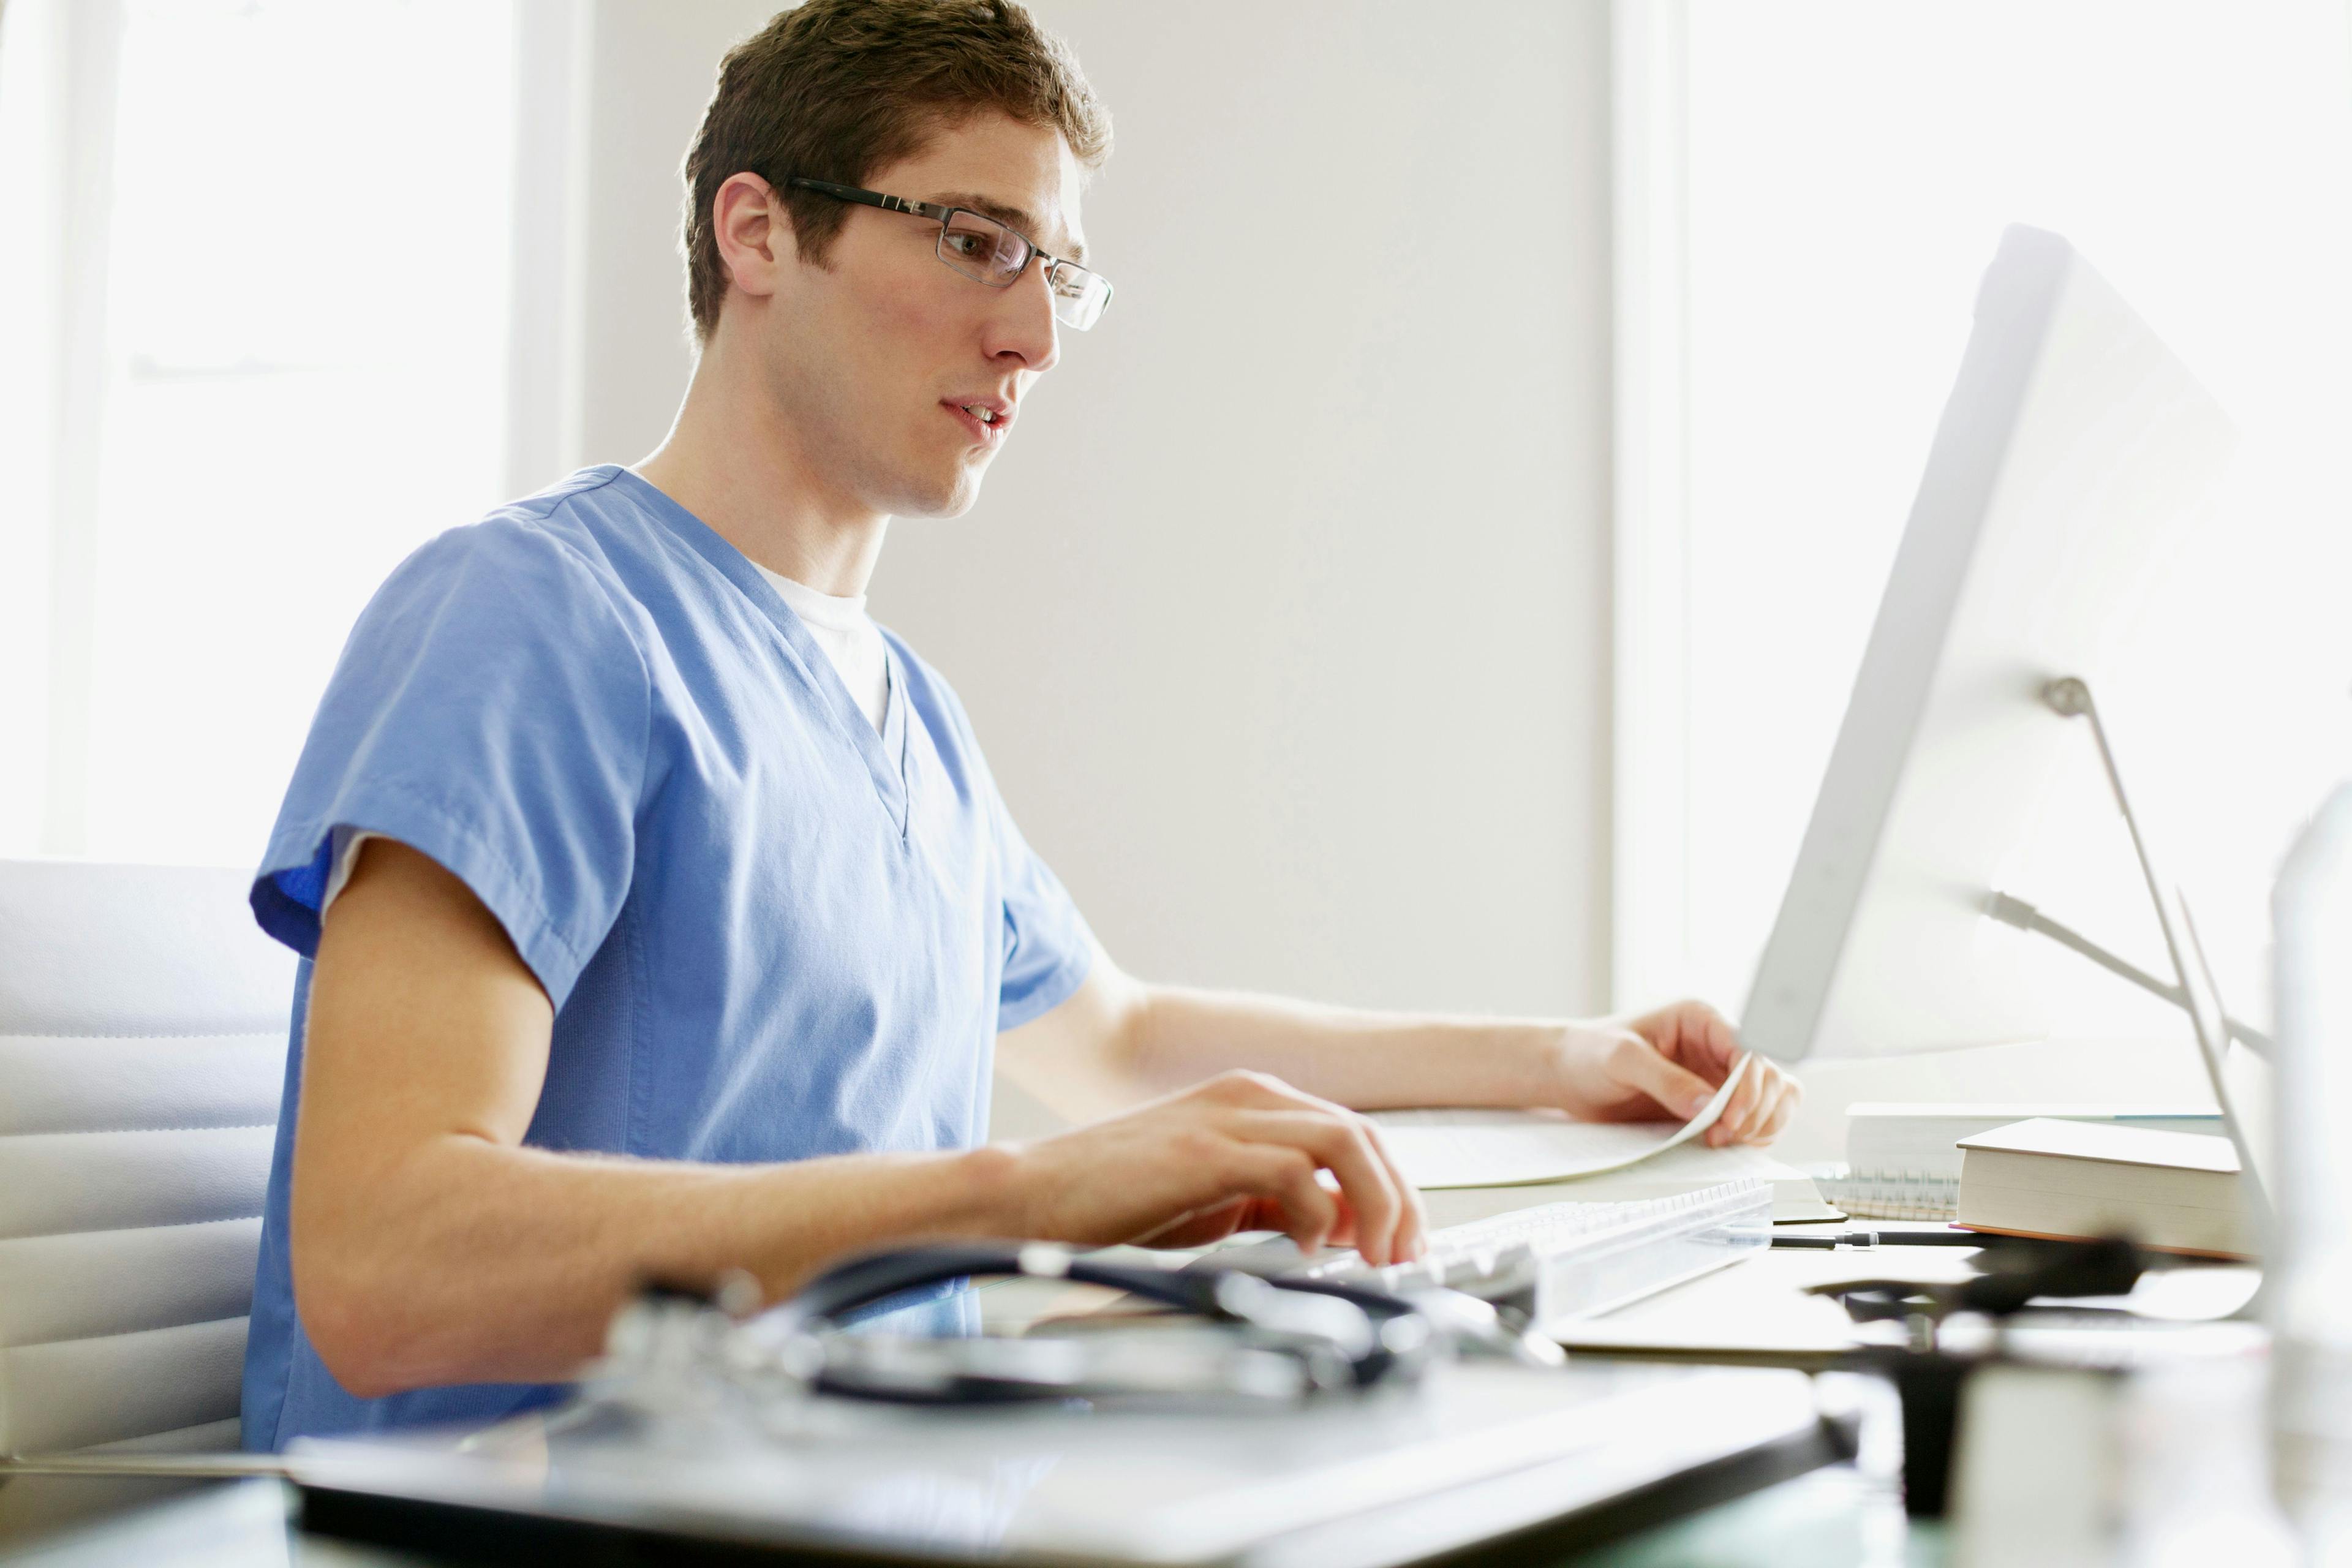 Healthcare organizations must adopt a pragmatic approach that integrates training into scheduled programs. (Image credit: ©HeroImages - stock.adobe.com)